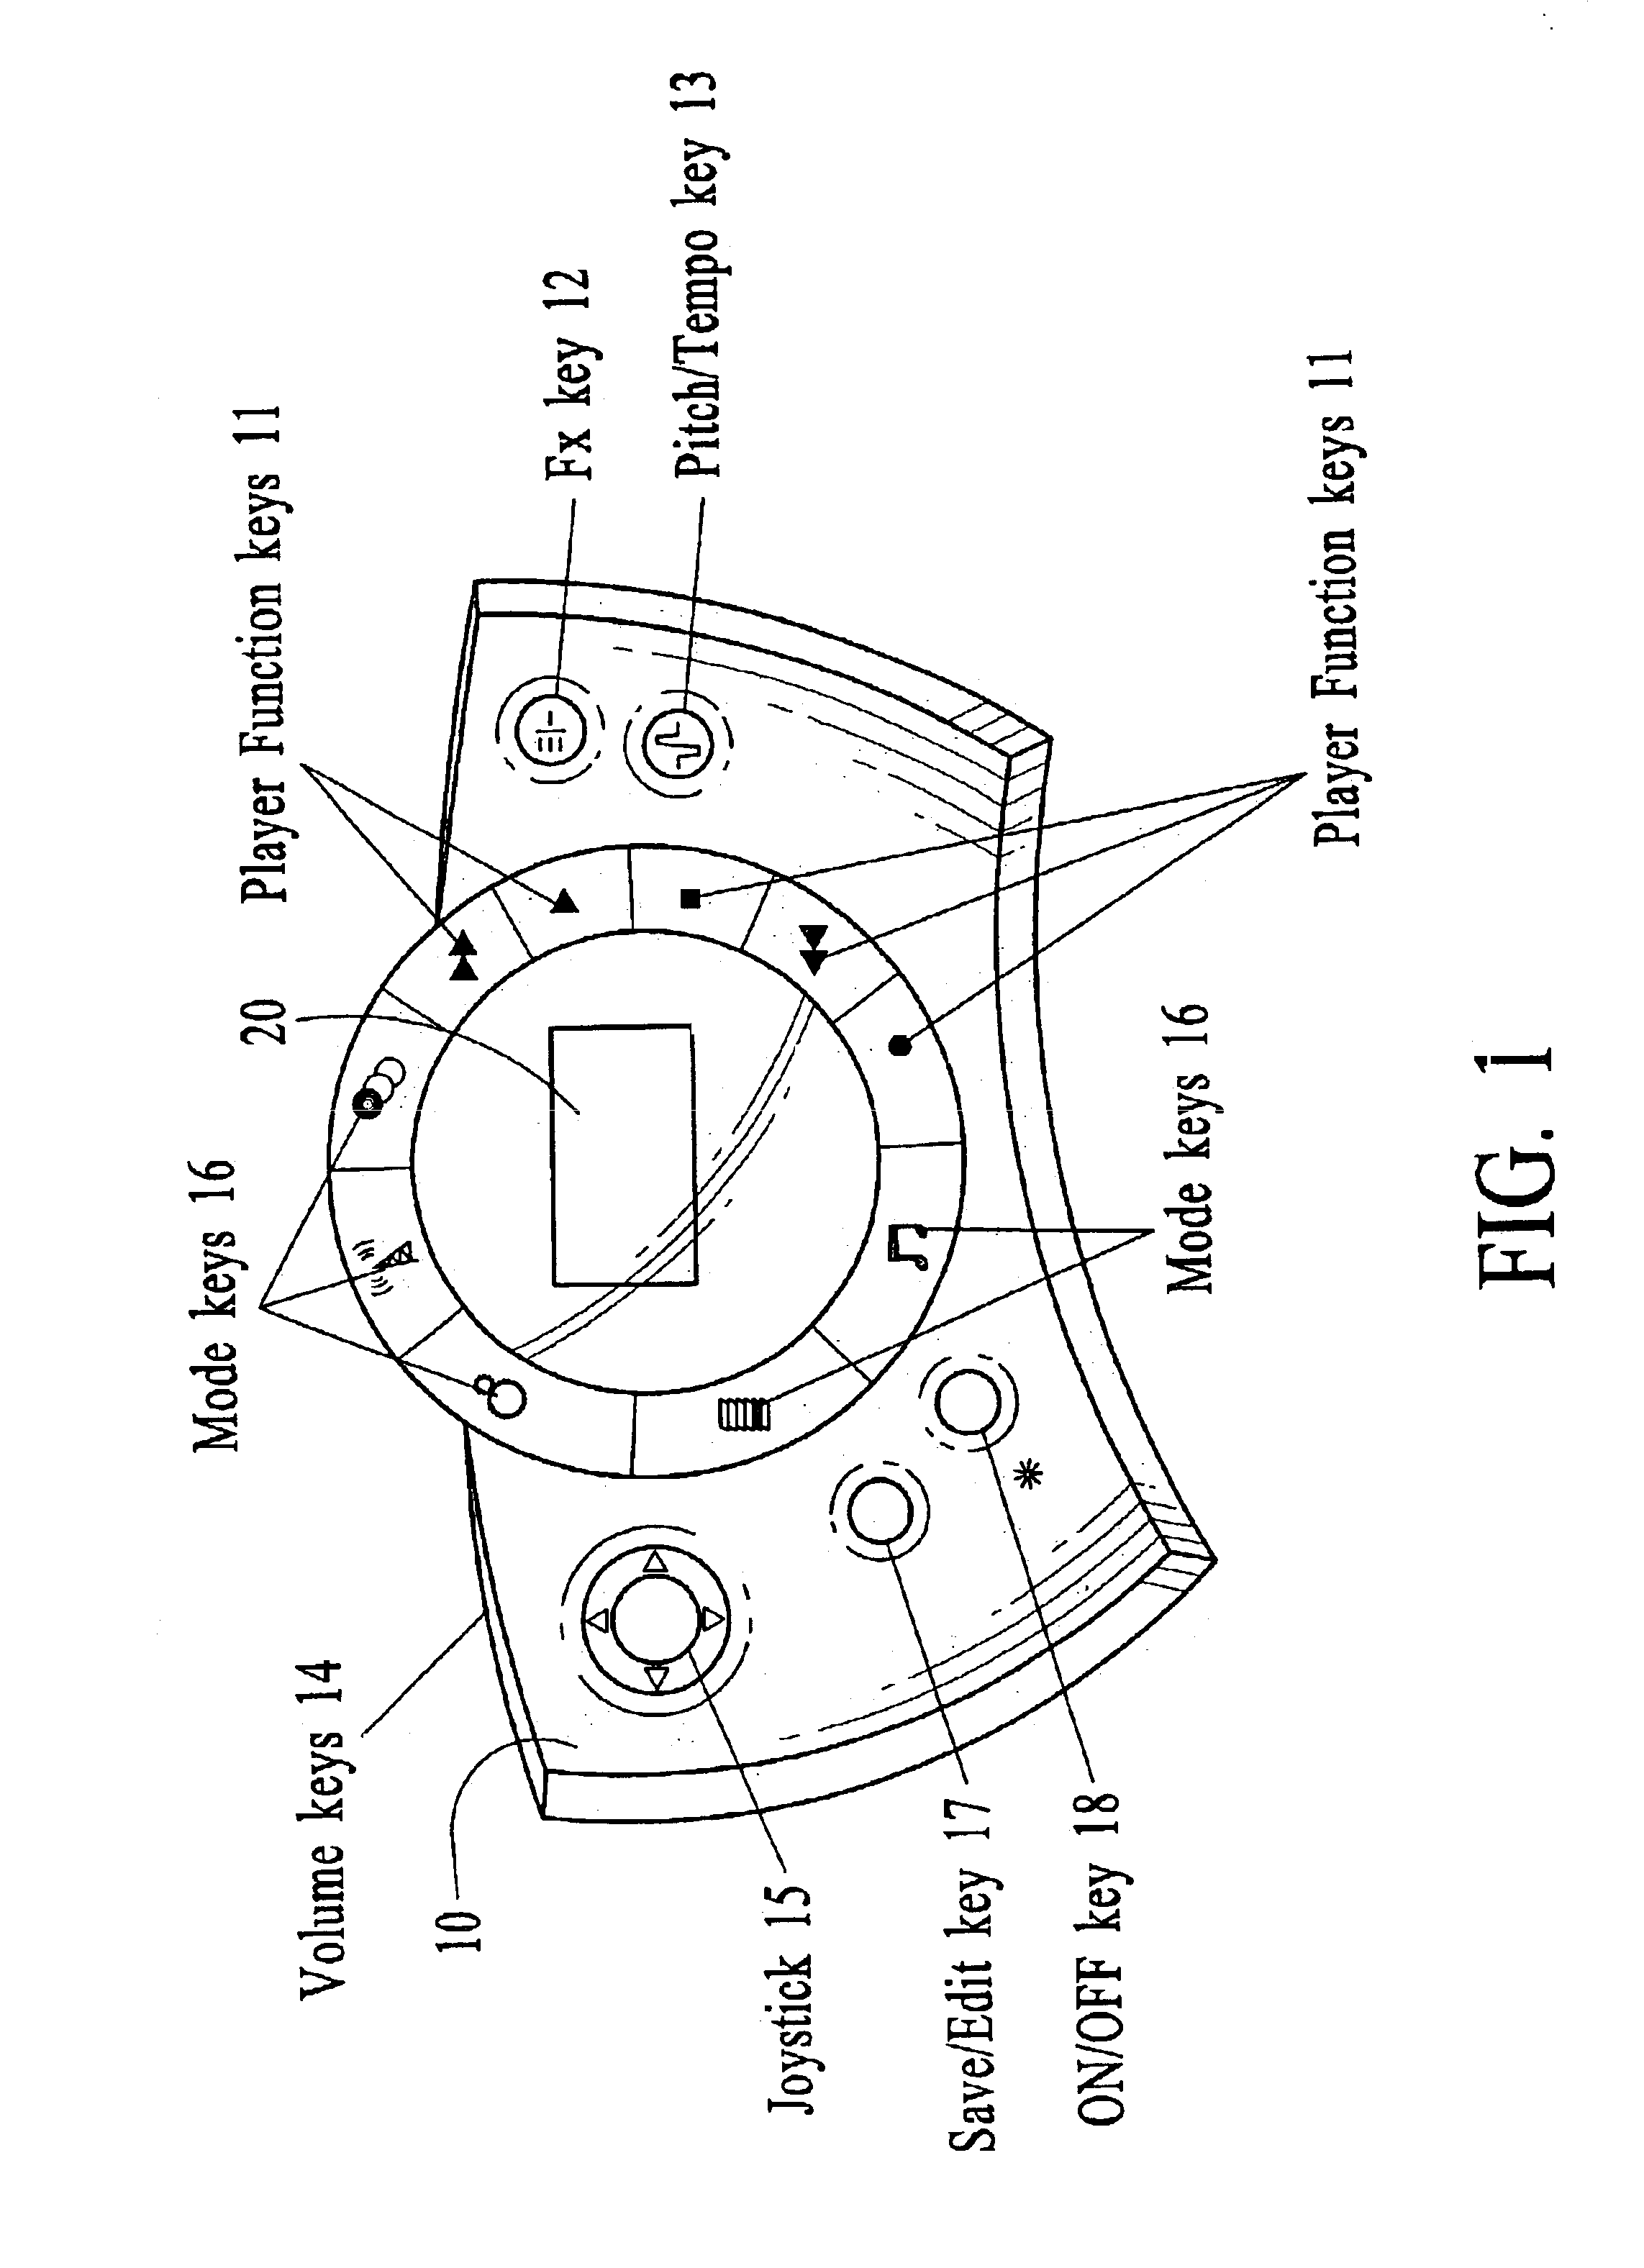 Systems and methods for creating, modifying, interacting with and playing musical compositions